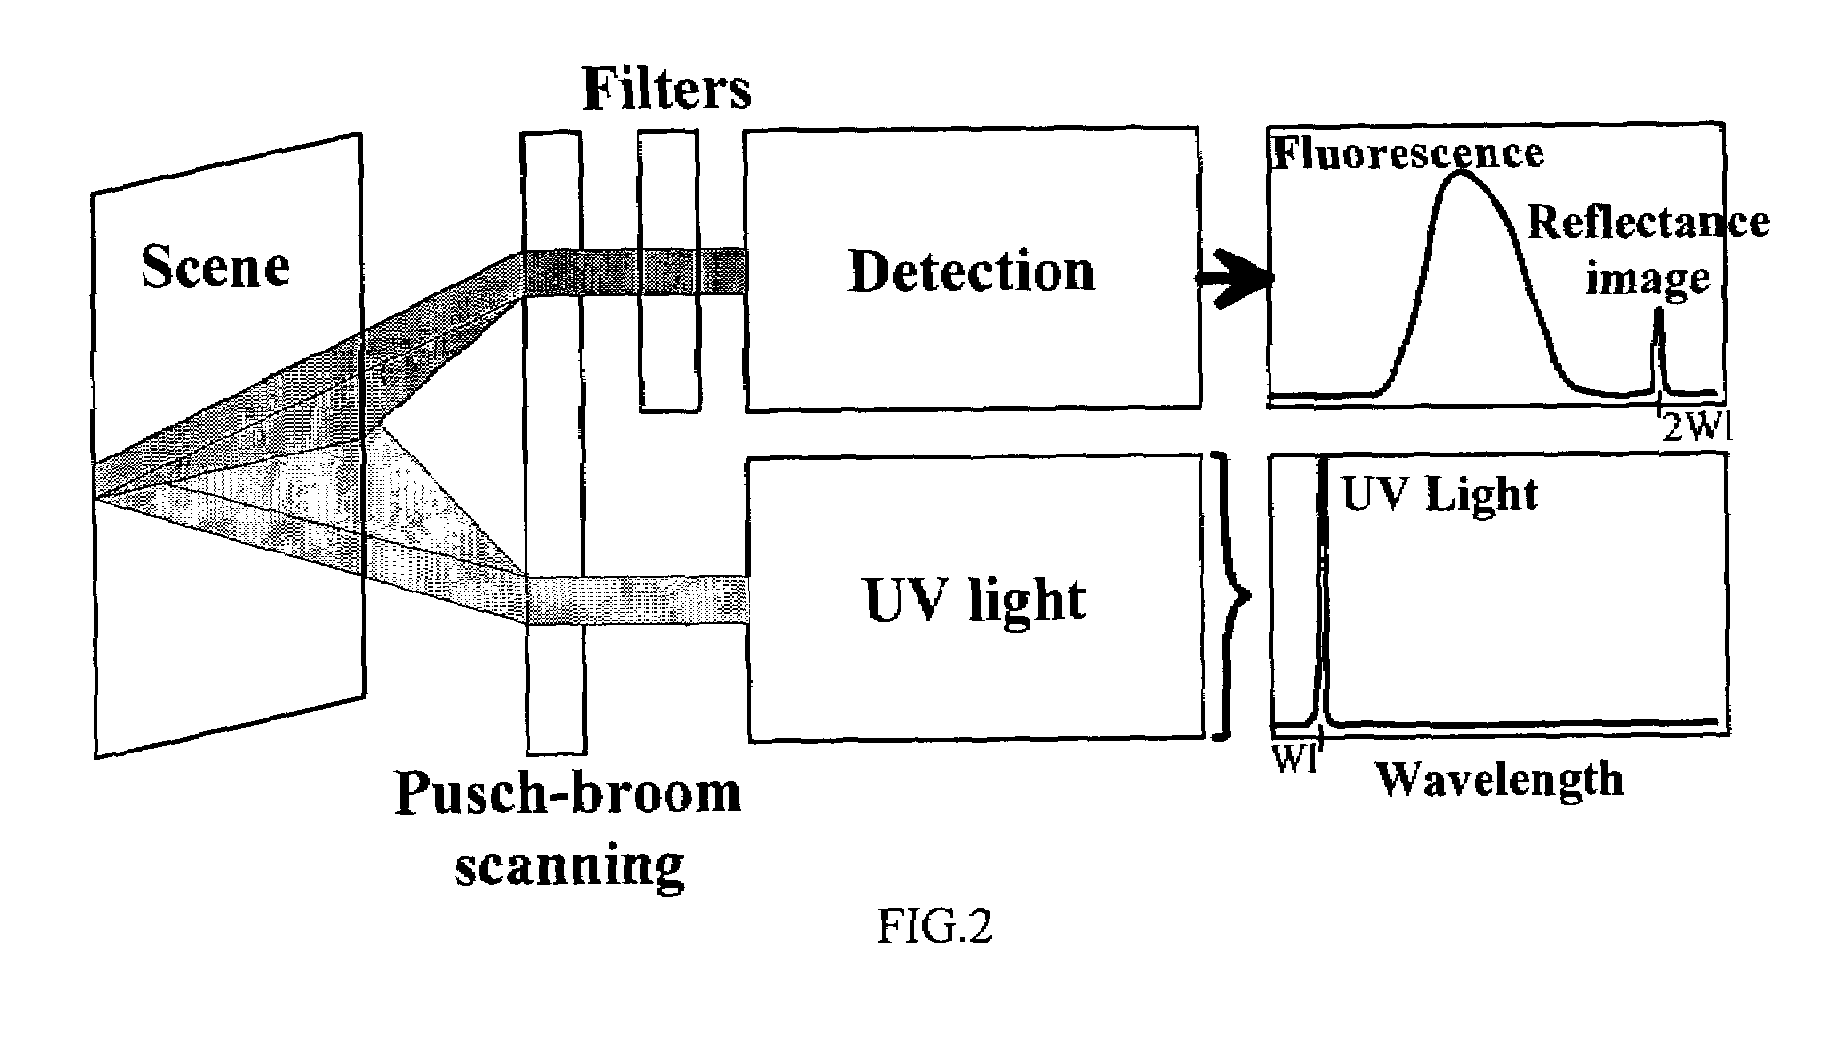 Systems and methods for registering reflectance and fluorescence hyperspectral imagery